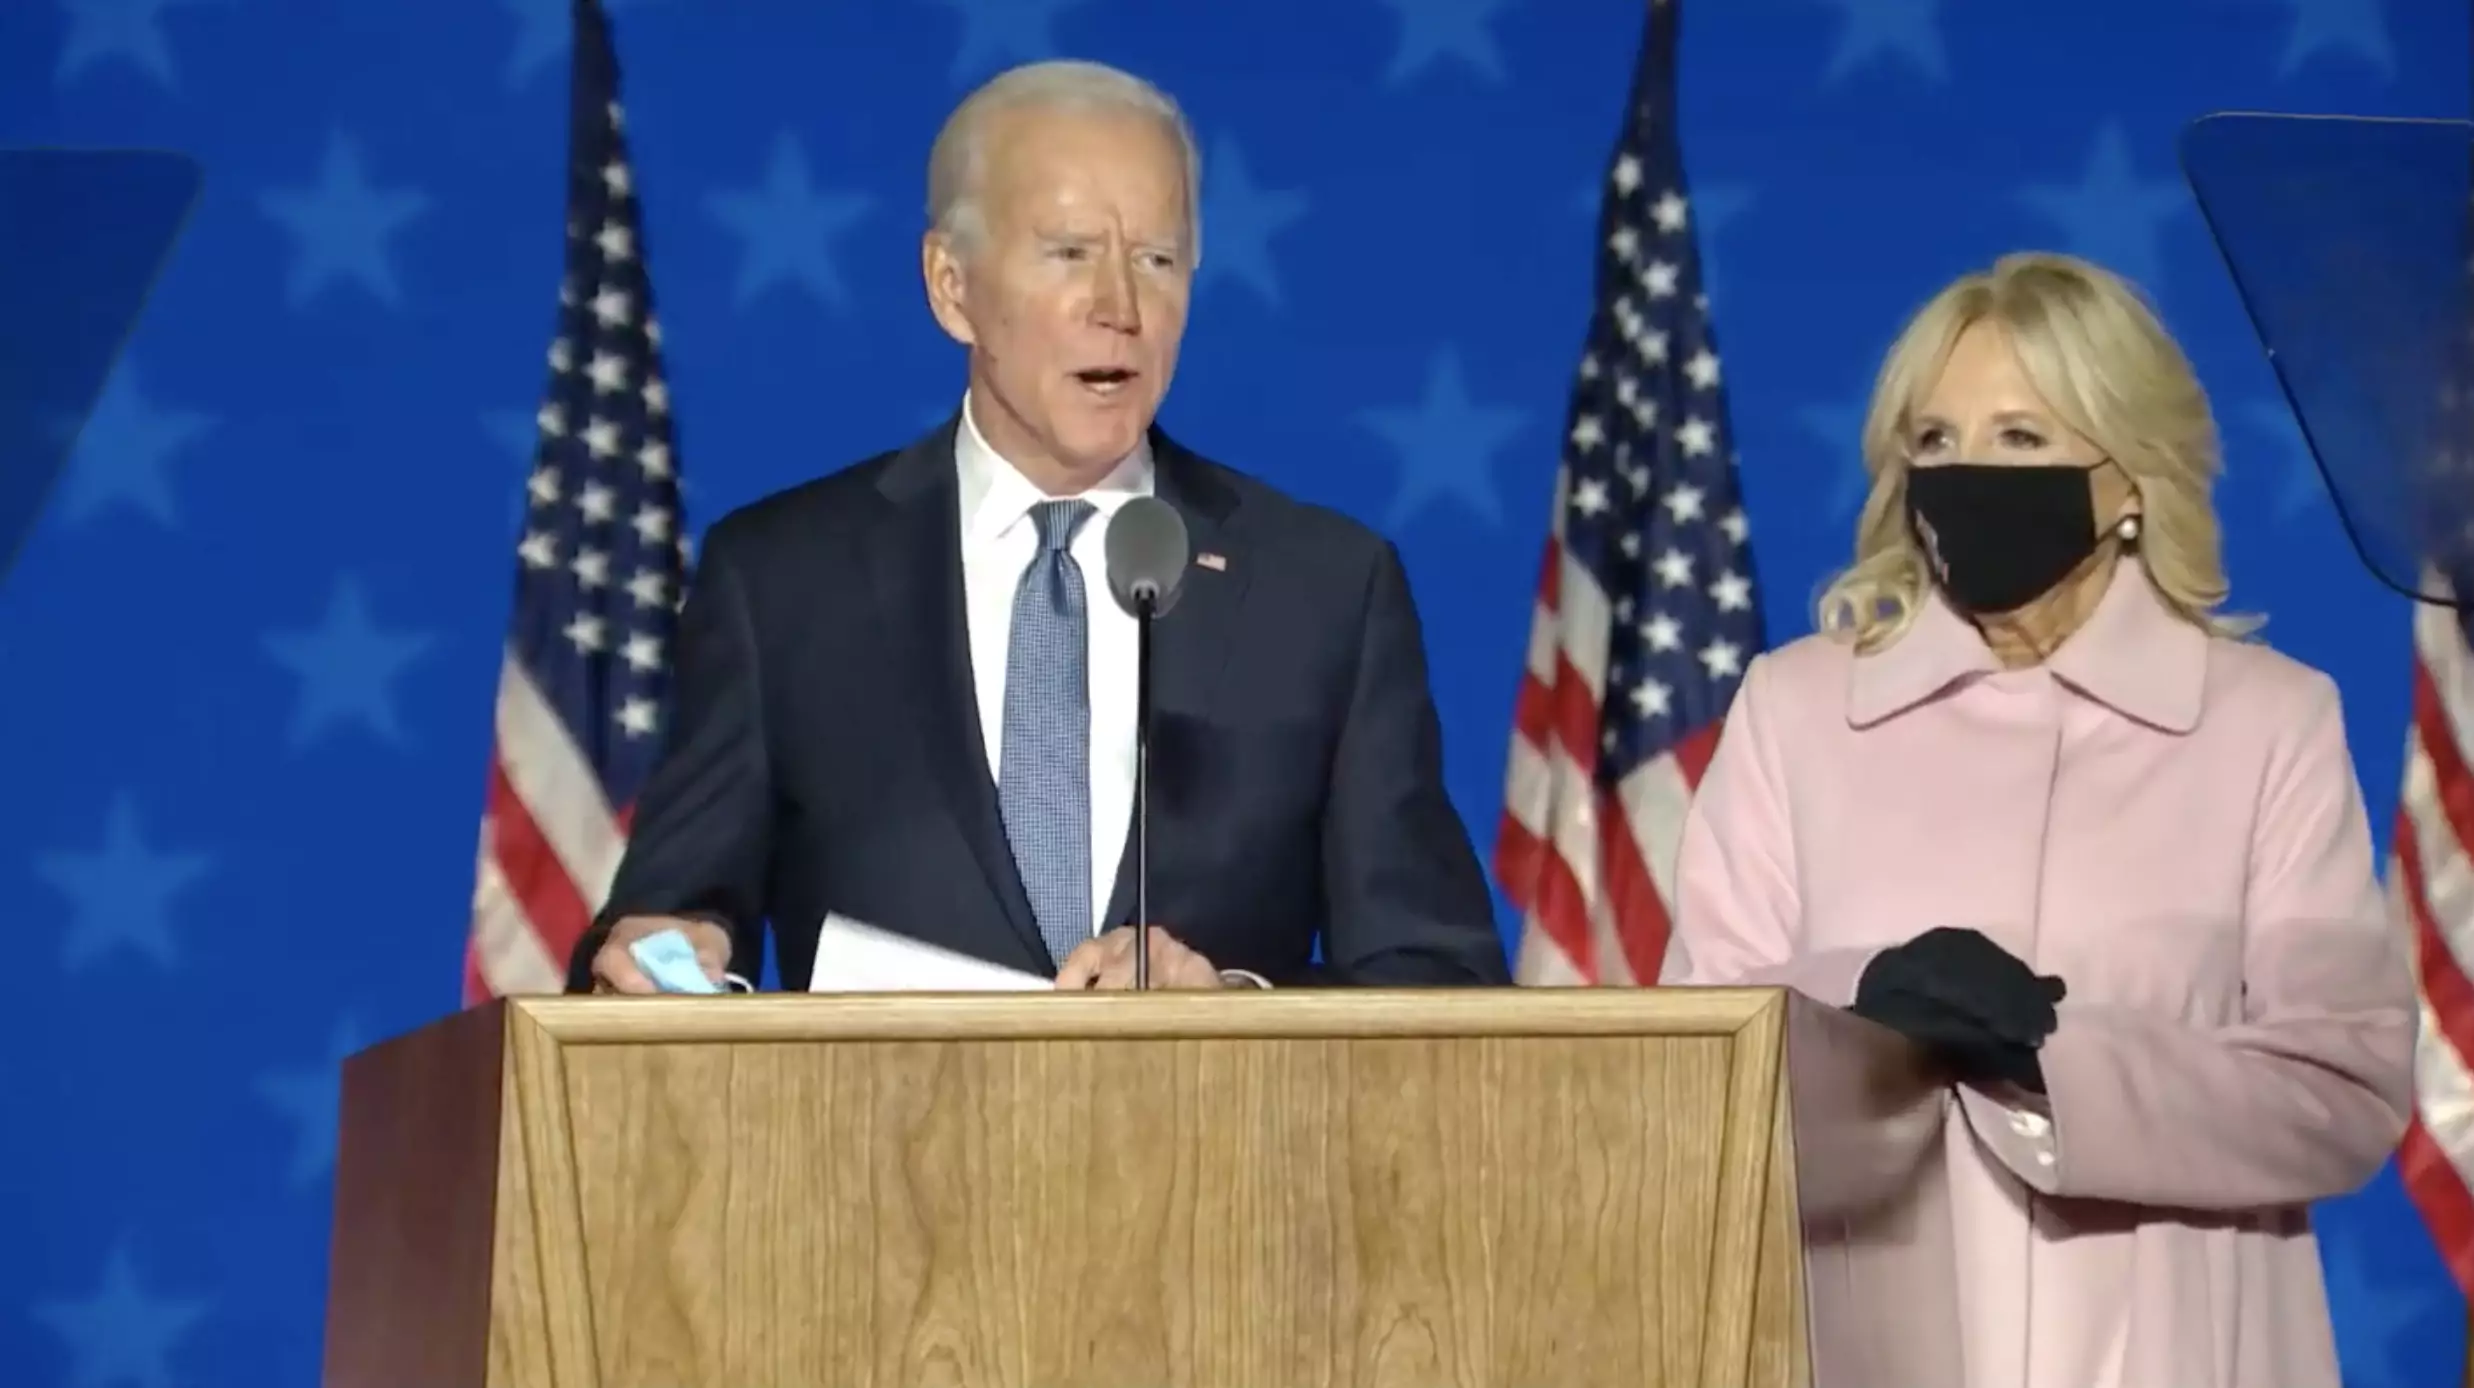 Joe and Jill Biden during the presidential campaign.